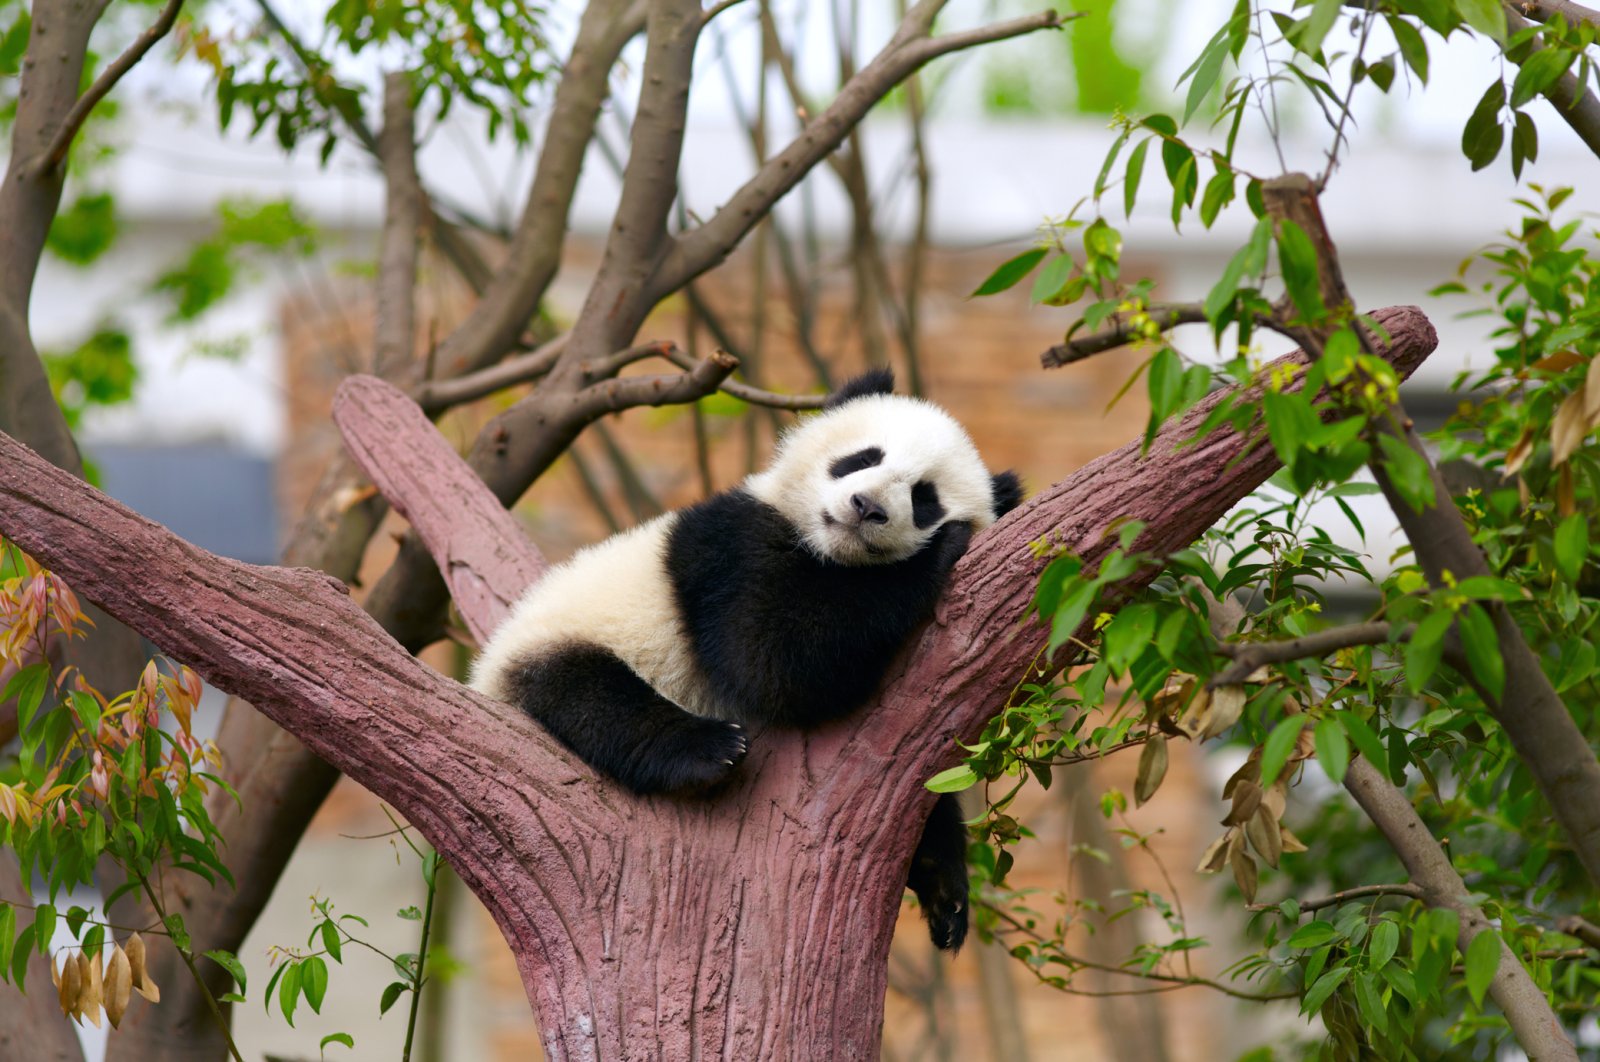 Along with local sea turtles, pandas are the most adopted species in Turkey as part of a wildlife adoption program. (iStock Photo)